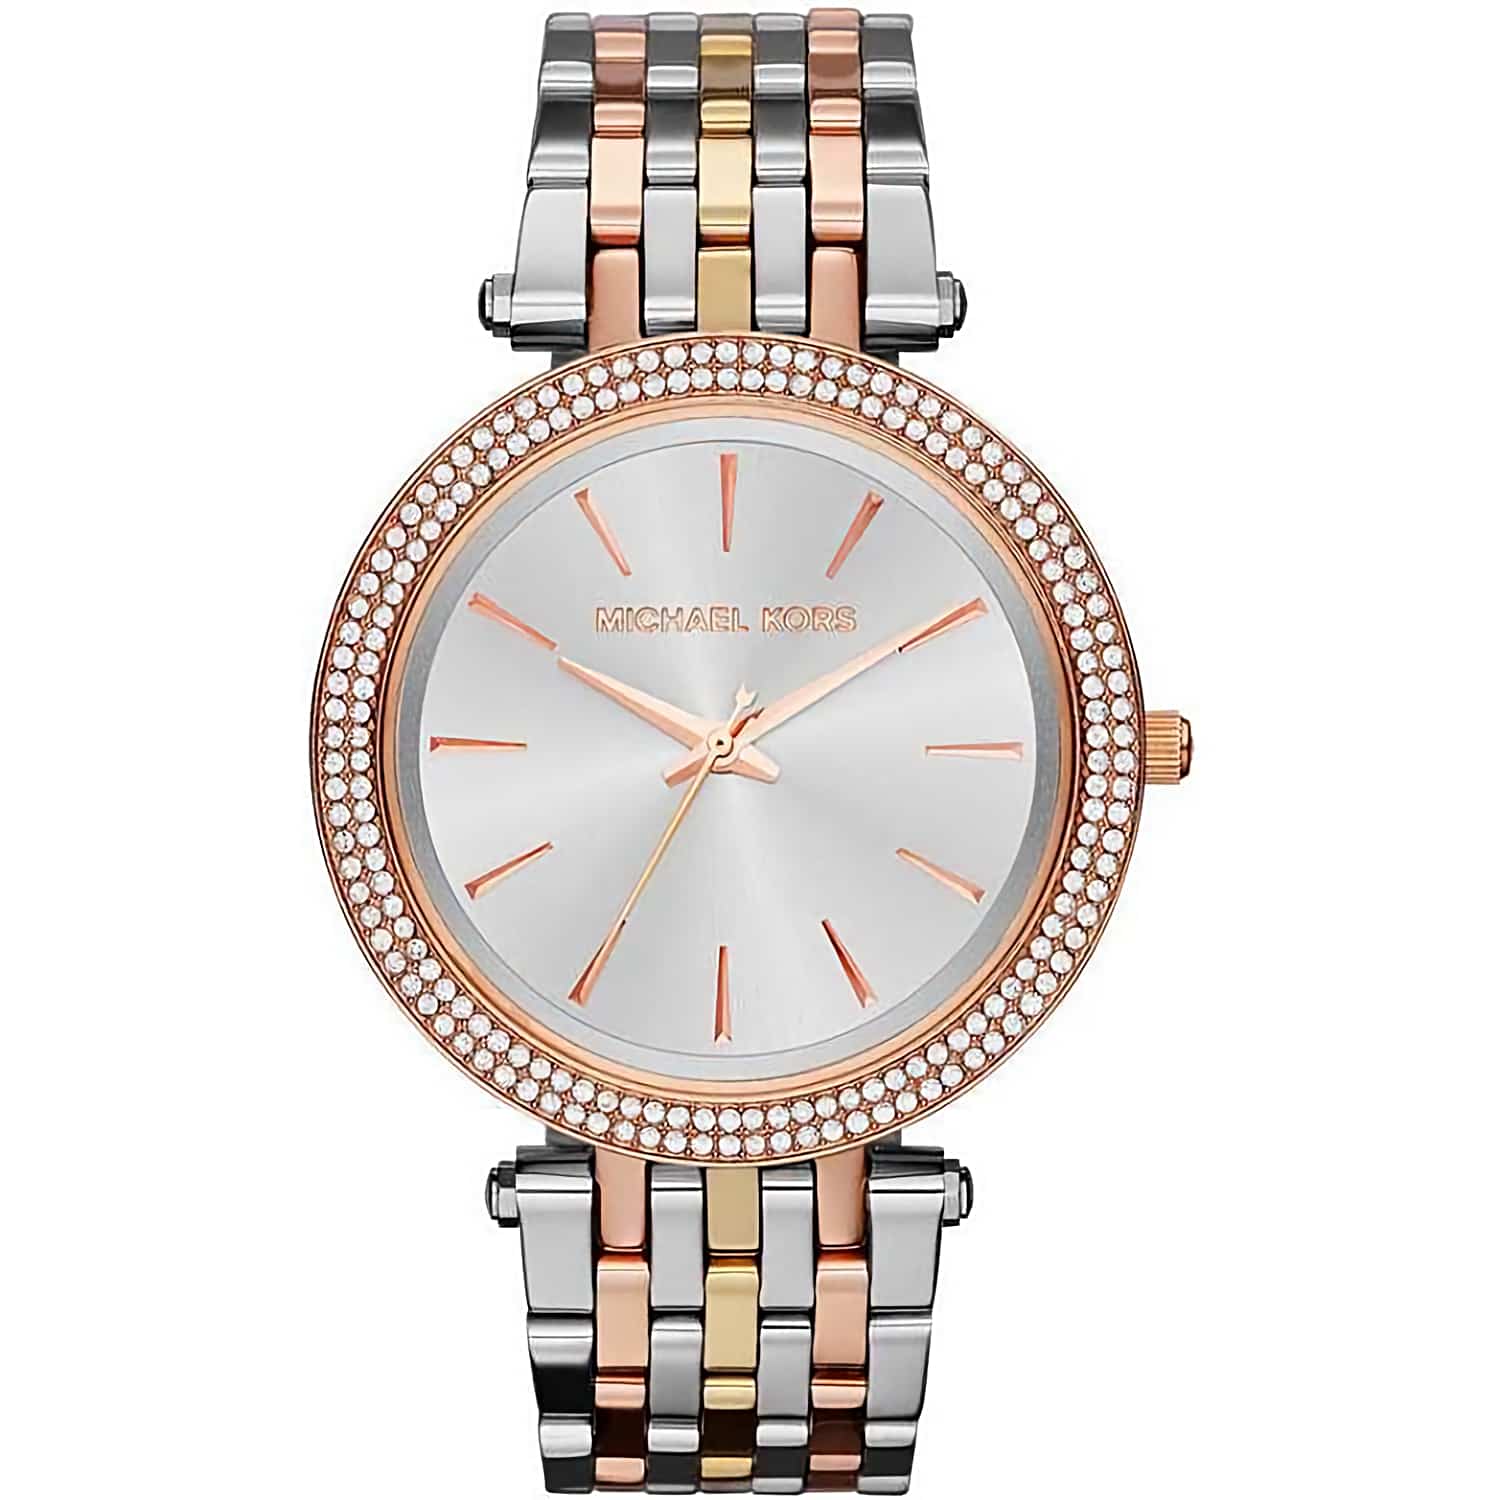 MK3203  Michael Kors Darci Glitz Watch. Michael Kors Darci MK3203 is a beautiful and attractive Ladies watch. Case is made out of Two-tone steel/gold plate and the Silver dial gives the watch that unique look.Oxipay is simply the easier way to pay - use O